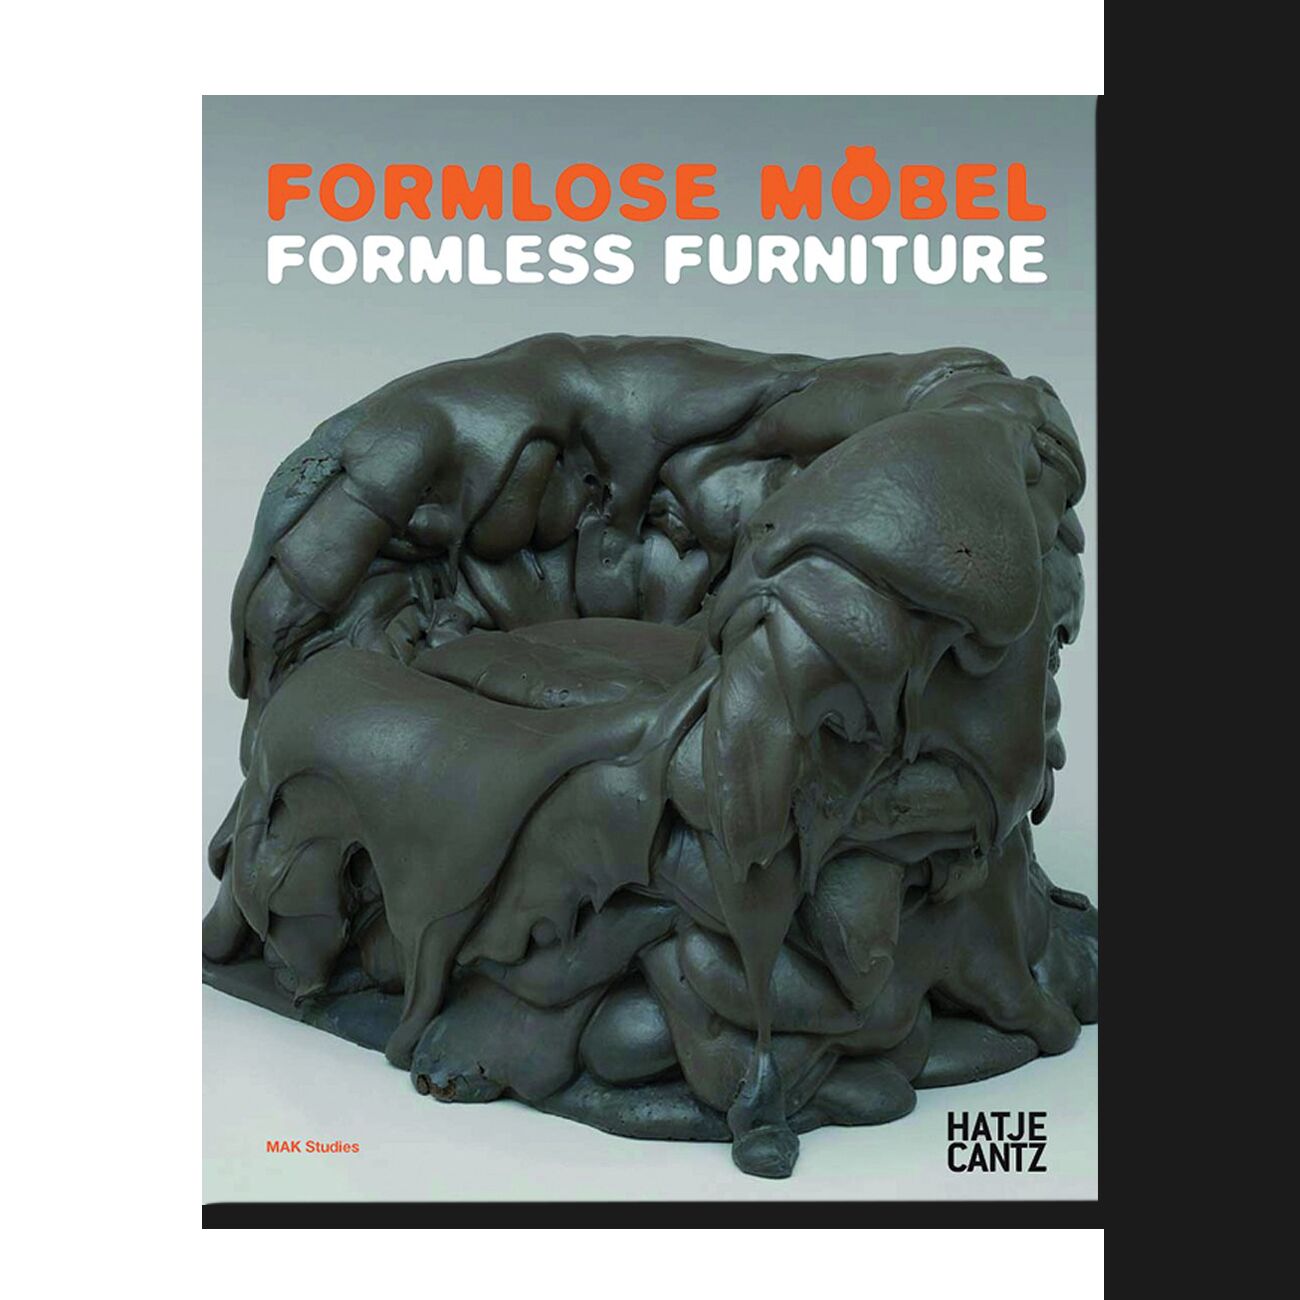 Formless Furniture